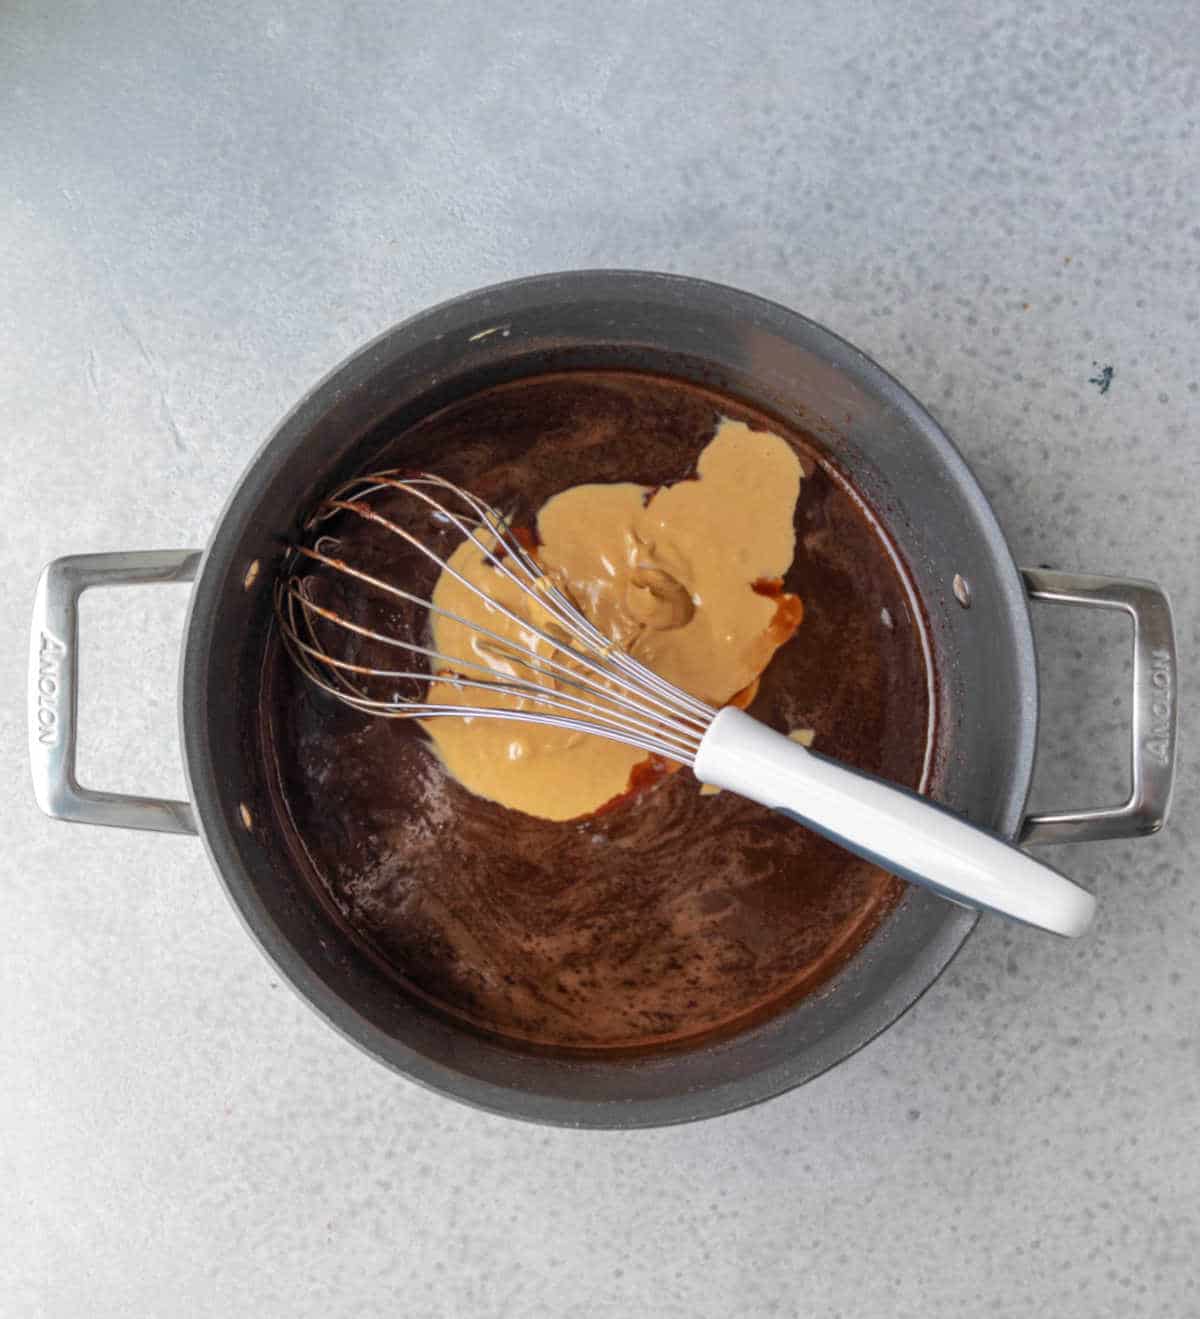 Peanut butter and vanilla on top of chocolate mixture in a saucepan.